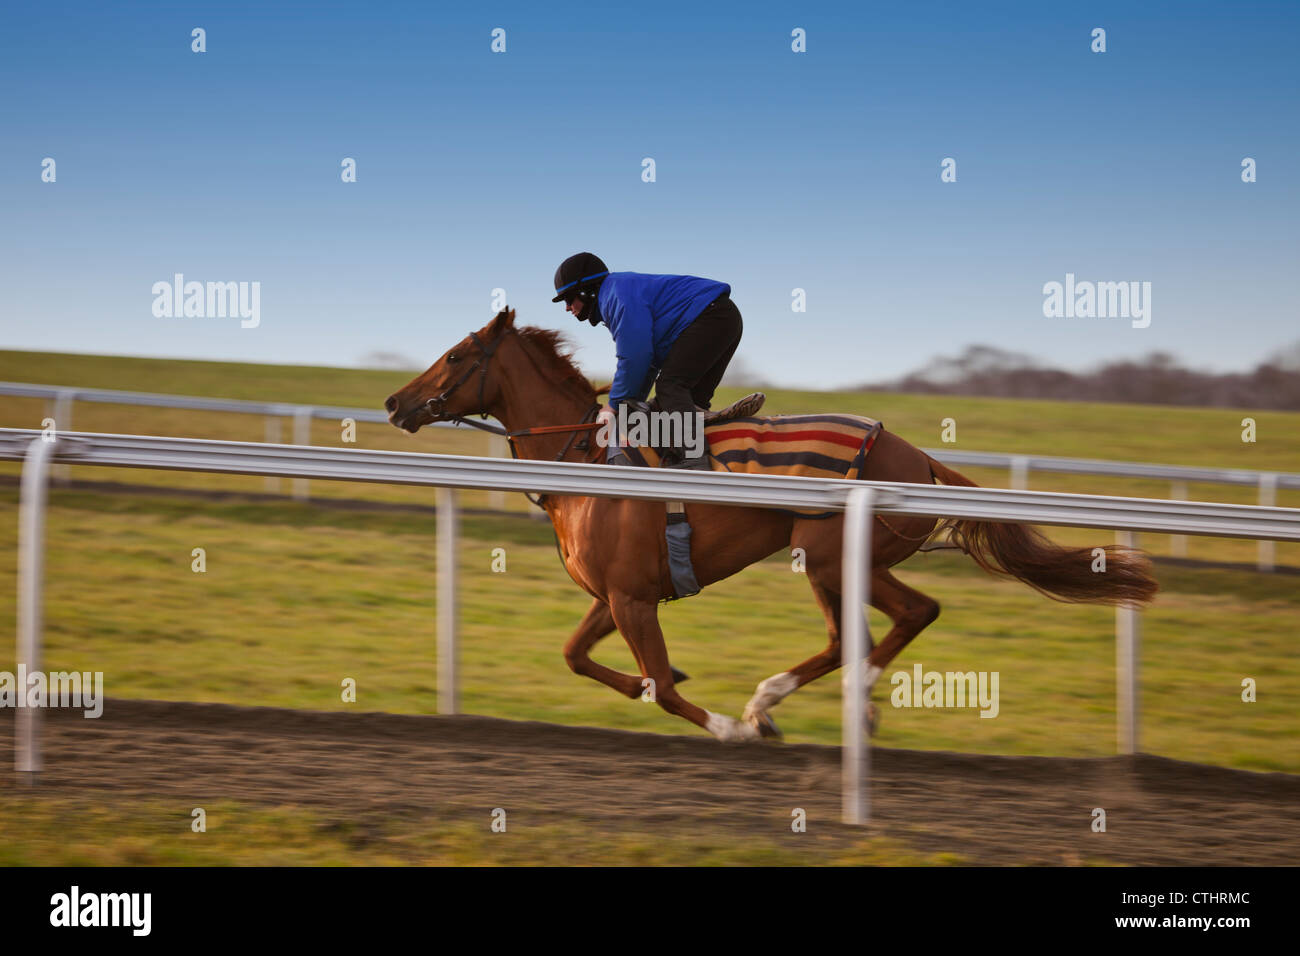 A thoroughbred racehorse in training Stock Photo